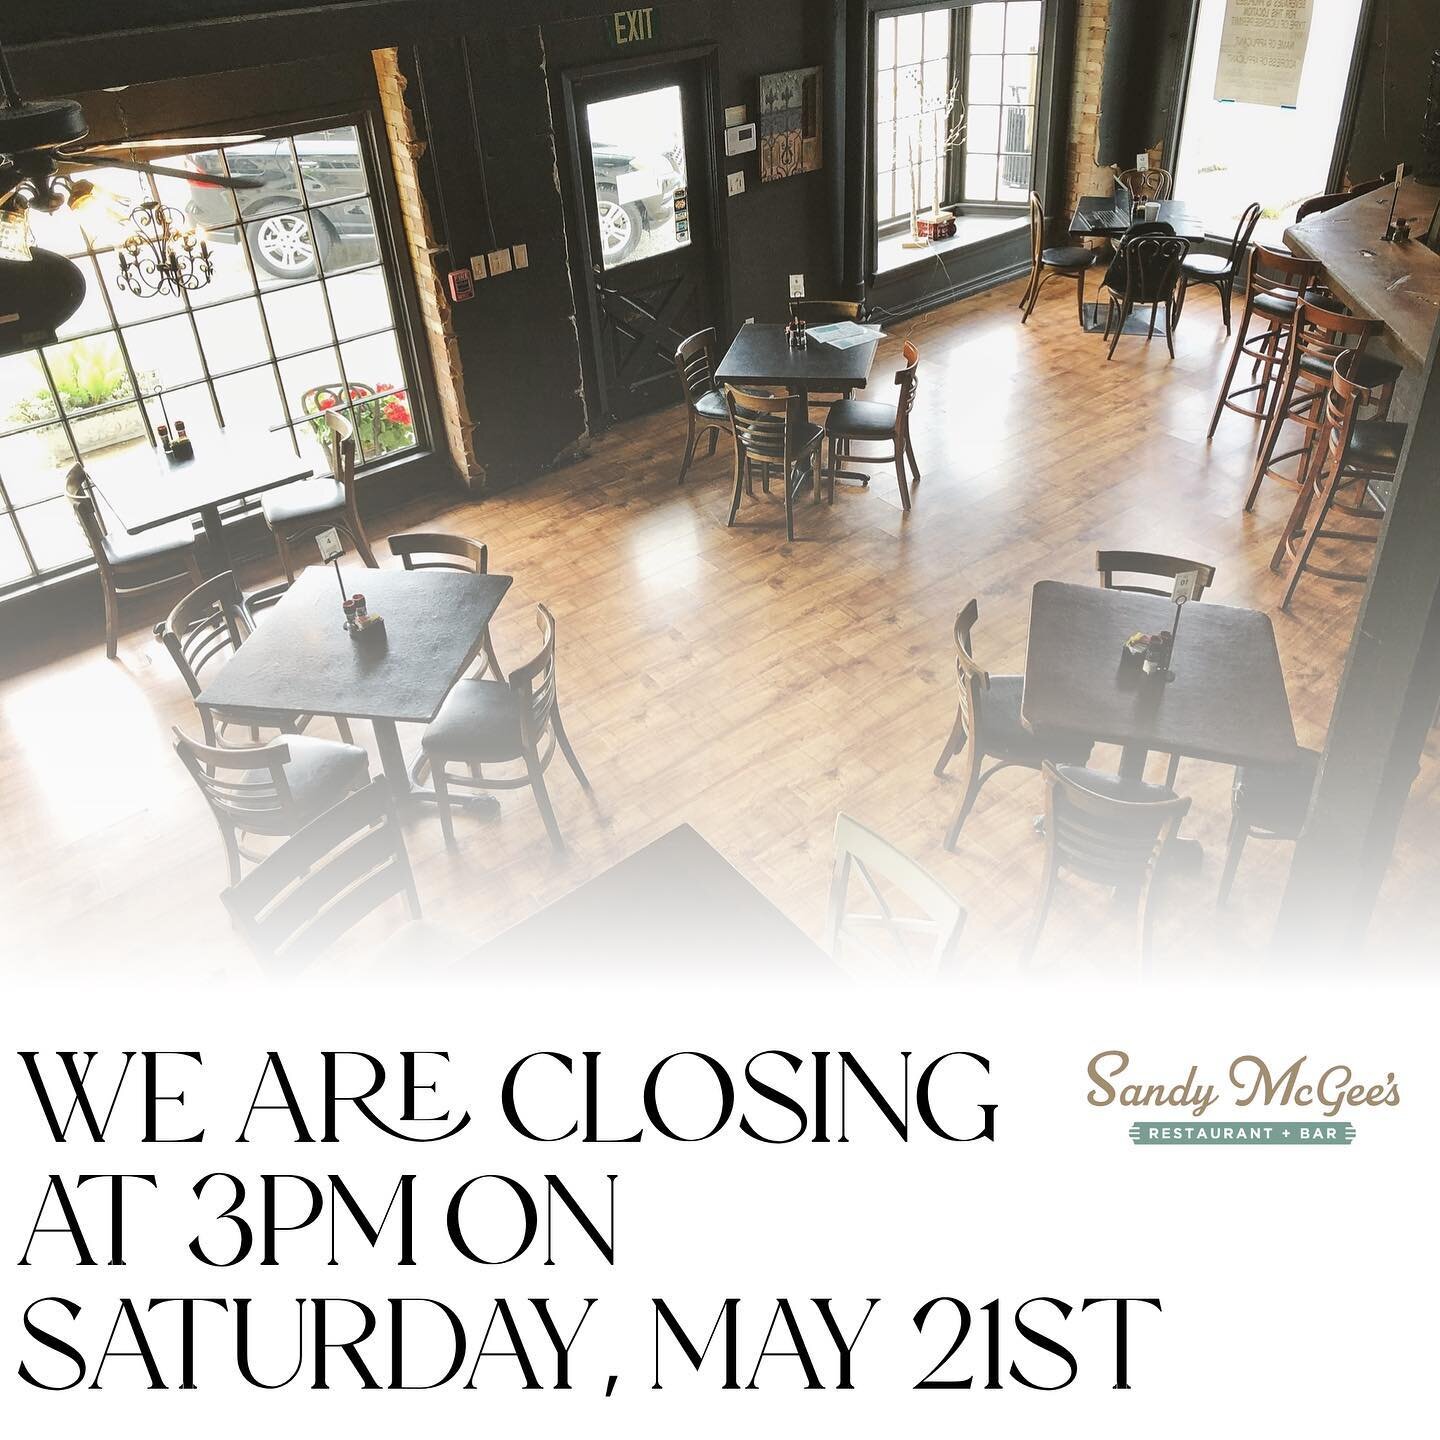 Sorry to ruin your dinner plans, but we will be closing early tomorrow (Saturday) due to staffing. Thanks for your understanding - back to business Monday!